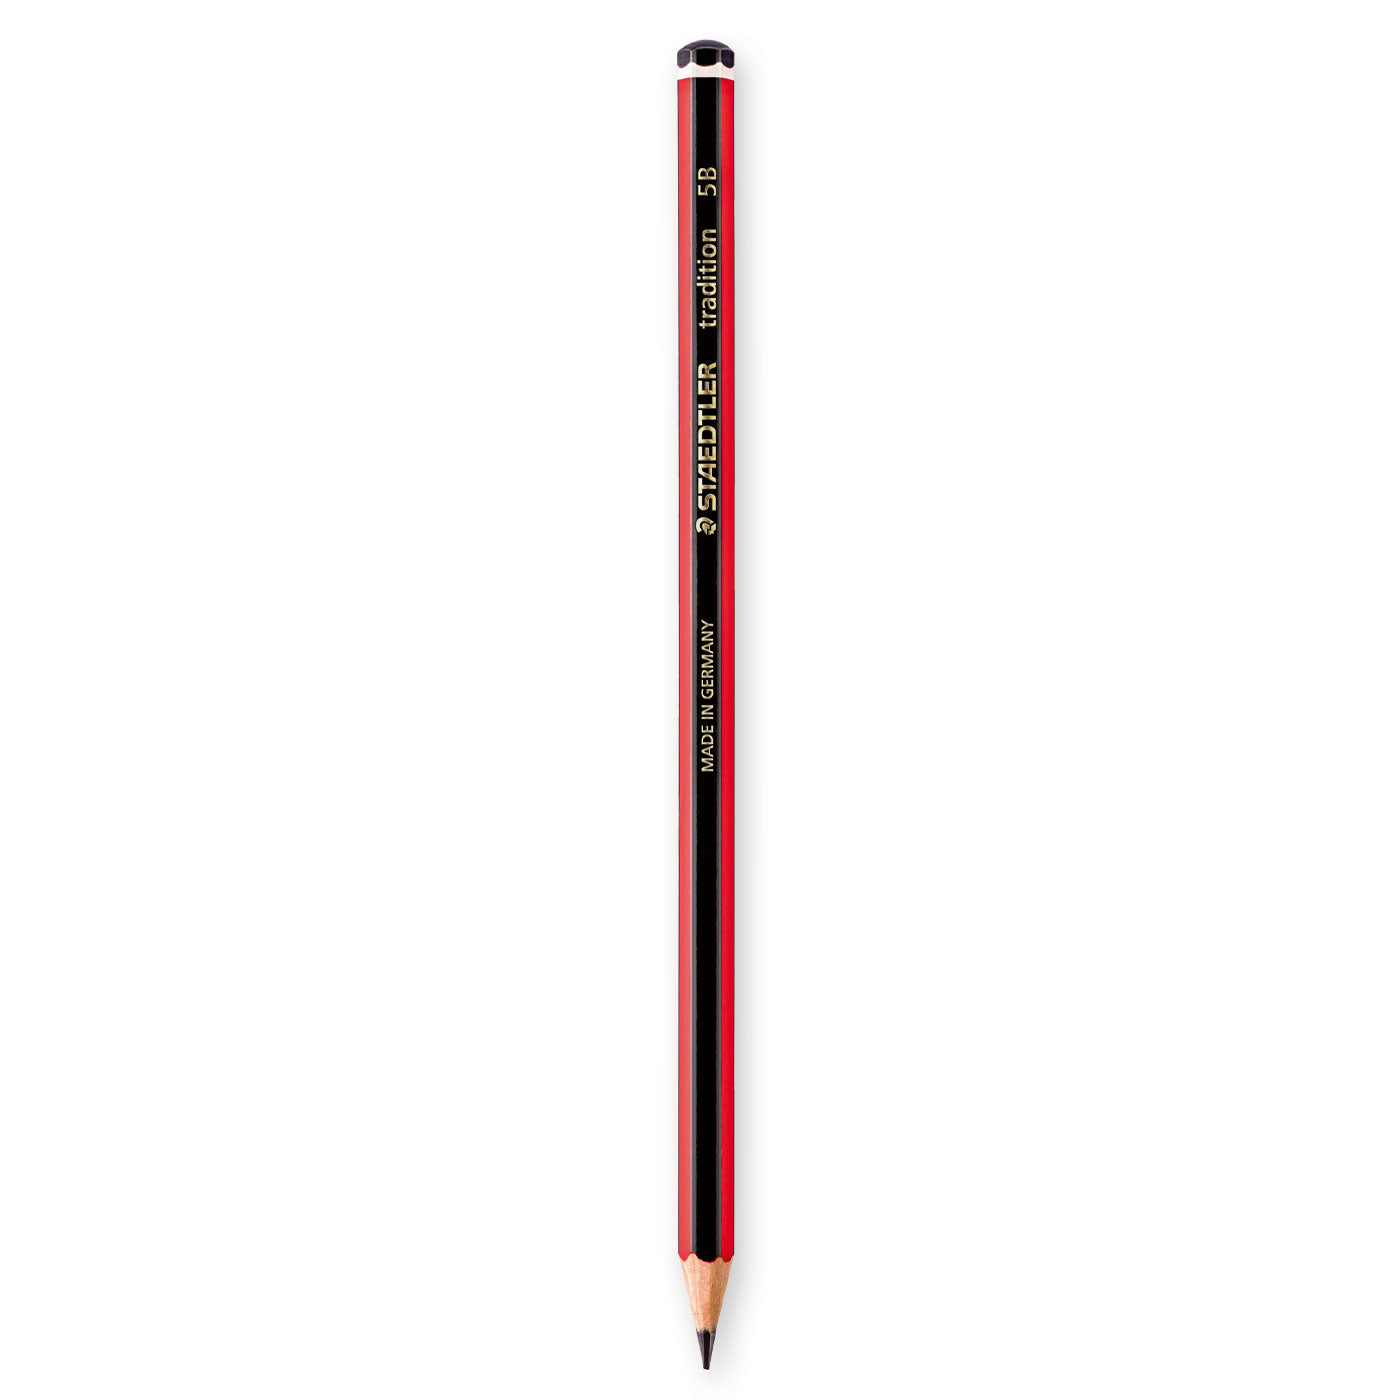 Staedtler Tradition Pencil 5B